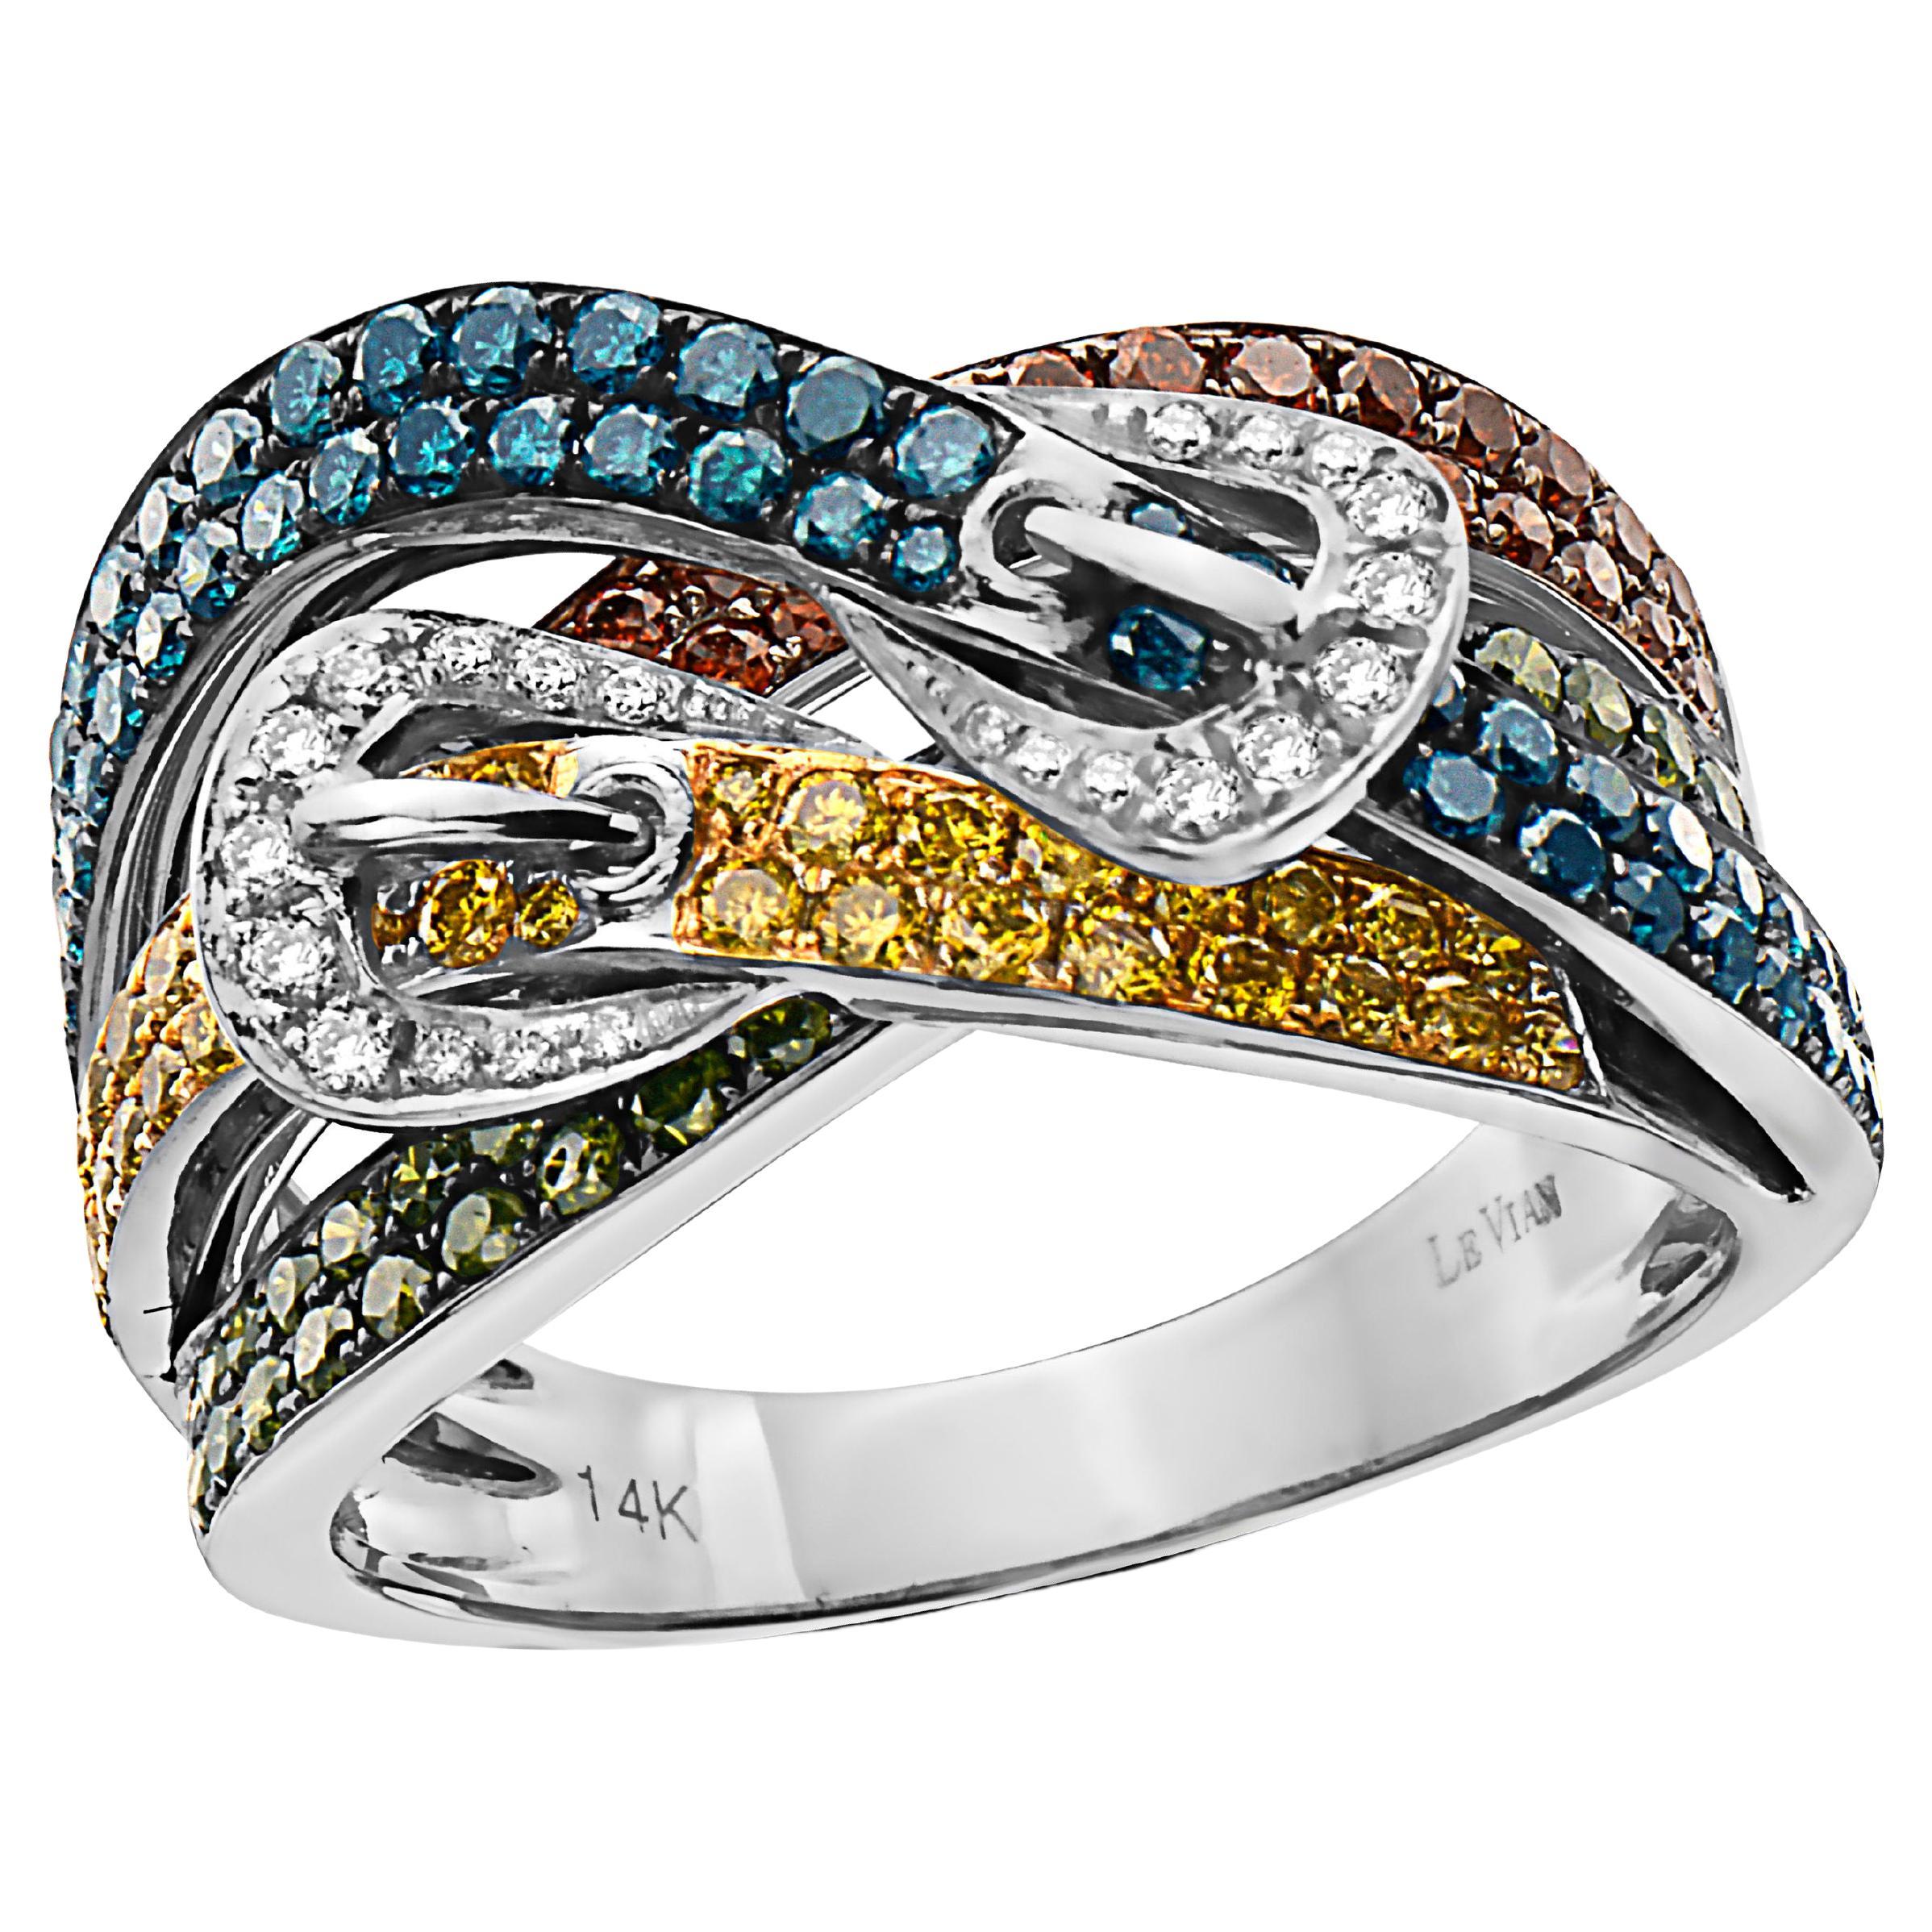 Grand Sample Sale Ring 1 1/2 Cts Red Green White Diamonds, Set in 14K White Gold